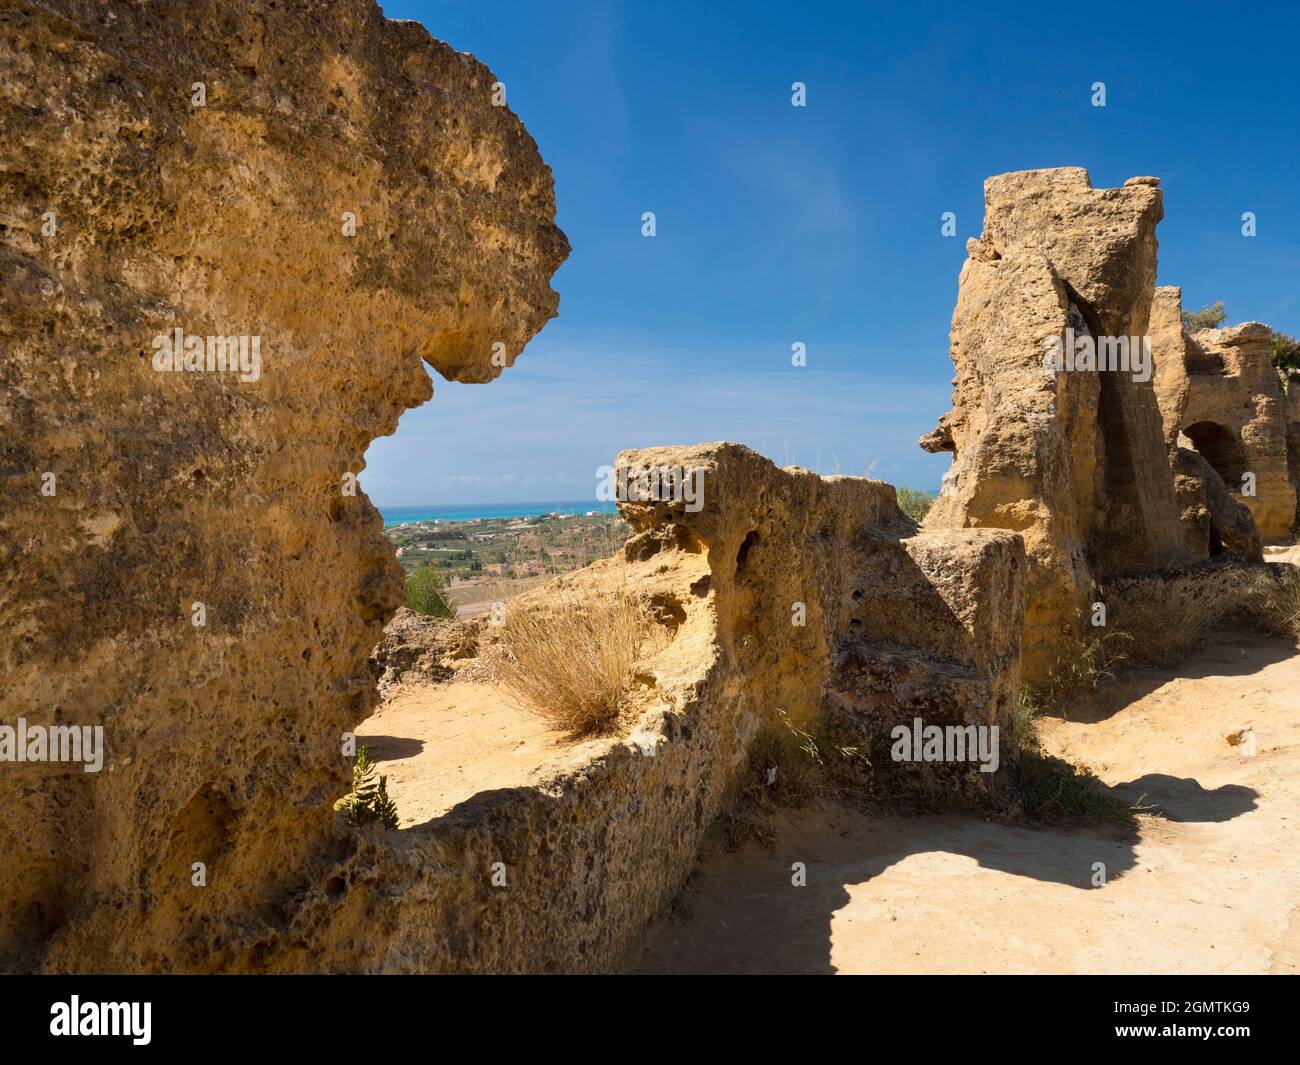 Agrigento, Sicily, Italy - 24 September 2019; no people in shot.     Overlooking the Mediterranean, these ancient Greek-era battlements protected the Stock Photo